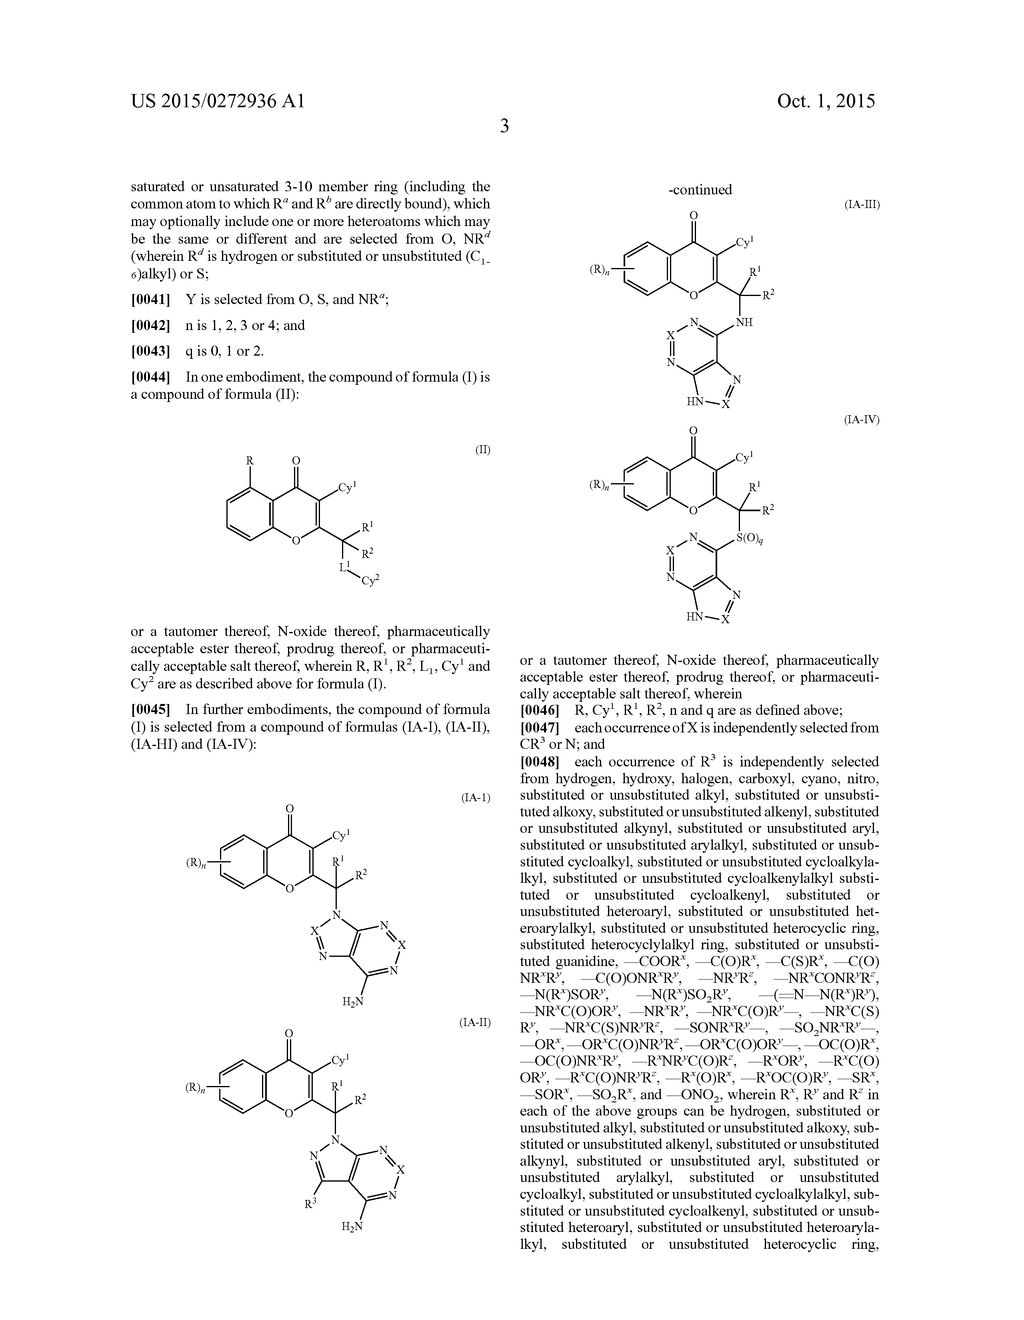 PHARMACEUTICAL COMPOSITIONS CONTAINING A PDE4 INHIBITOR AND A PI3 DELTA OR     DUAL PI3 DELTA-GAMMA KINASE INHIBITOR - diagram, schematic, and image 17